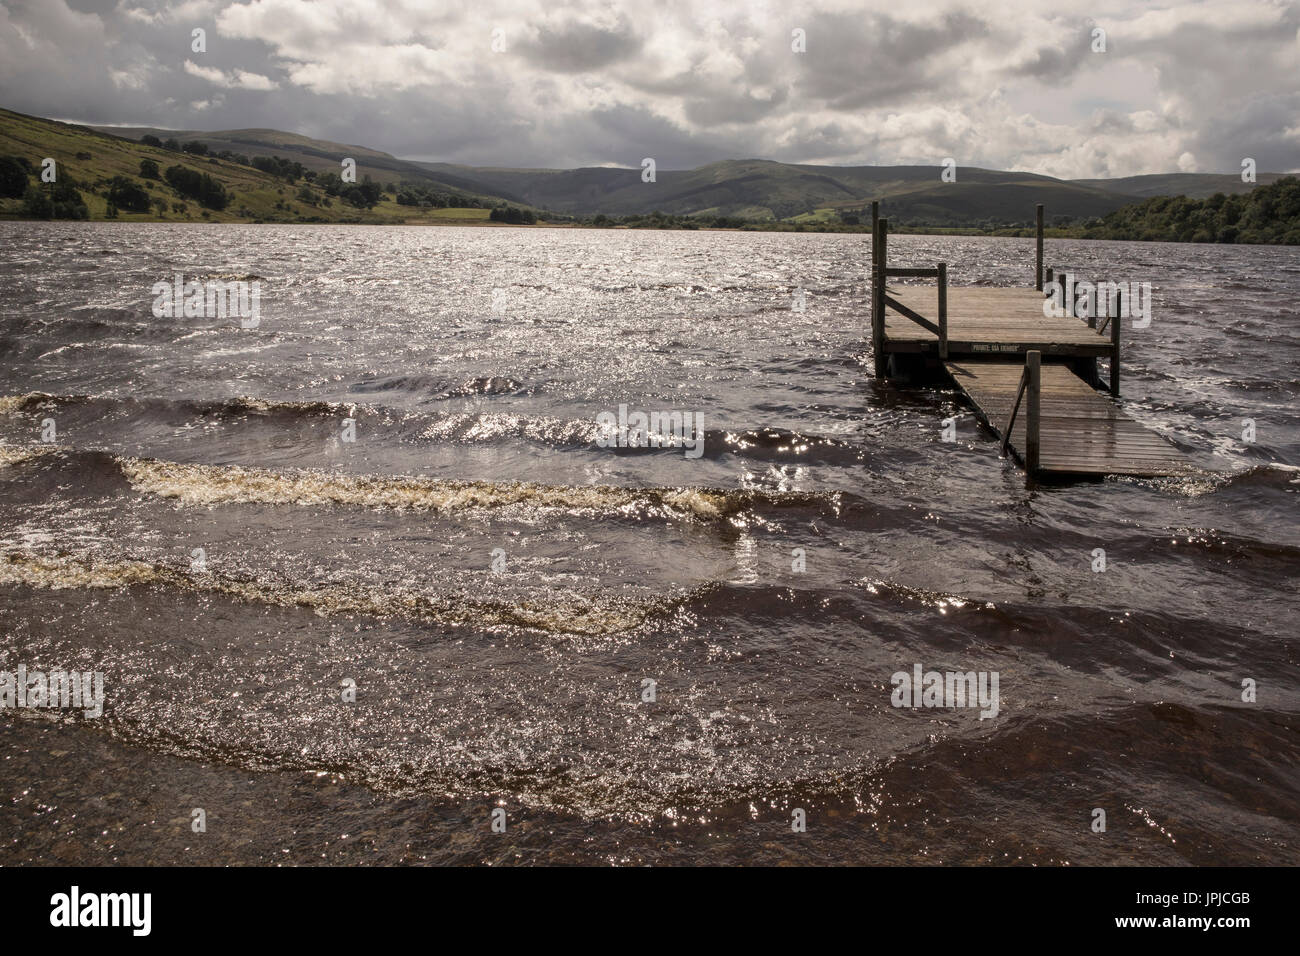 Flooded landing pier at Semer Water in North Yorkshire during windy weather Stock Photo